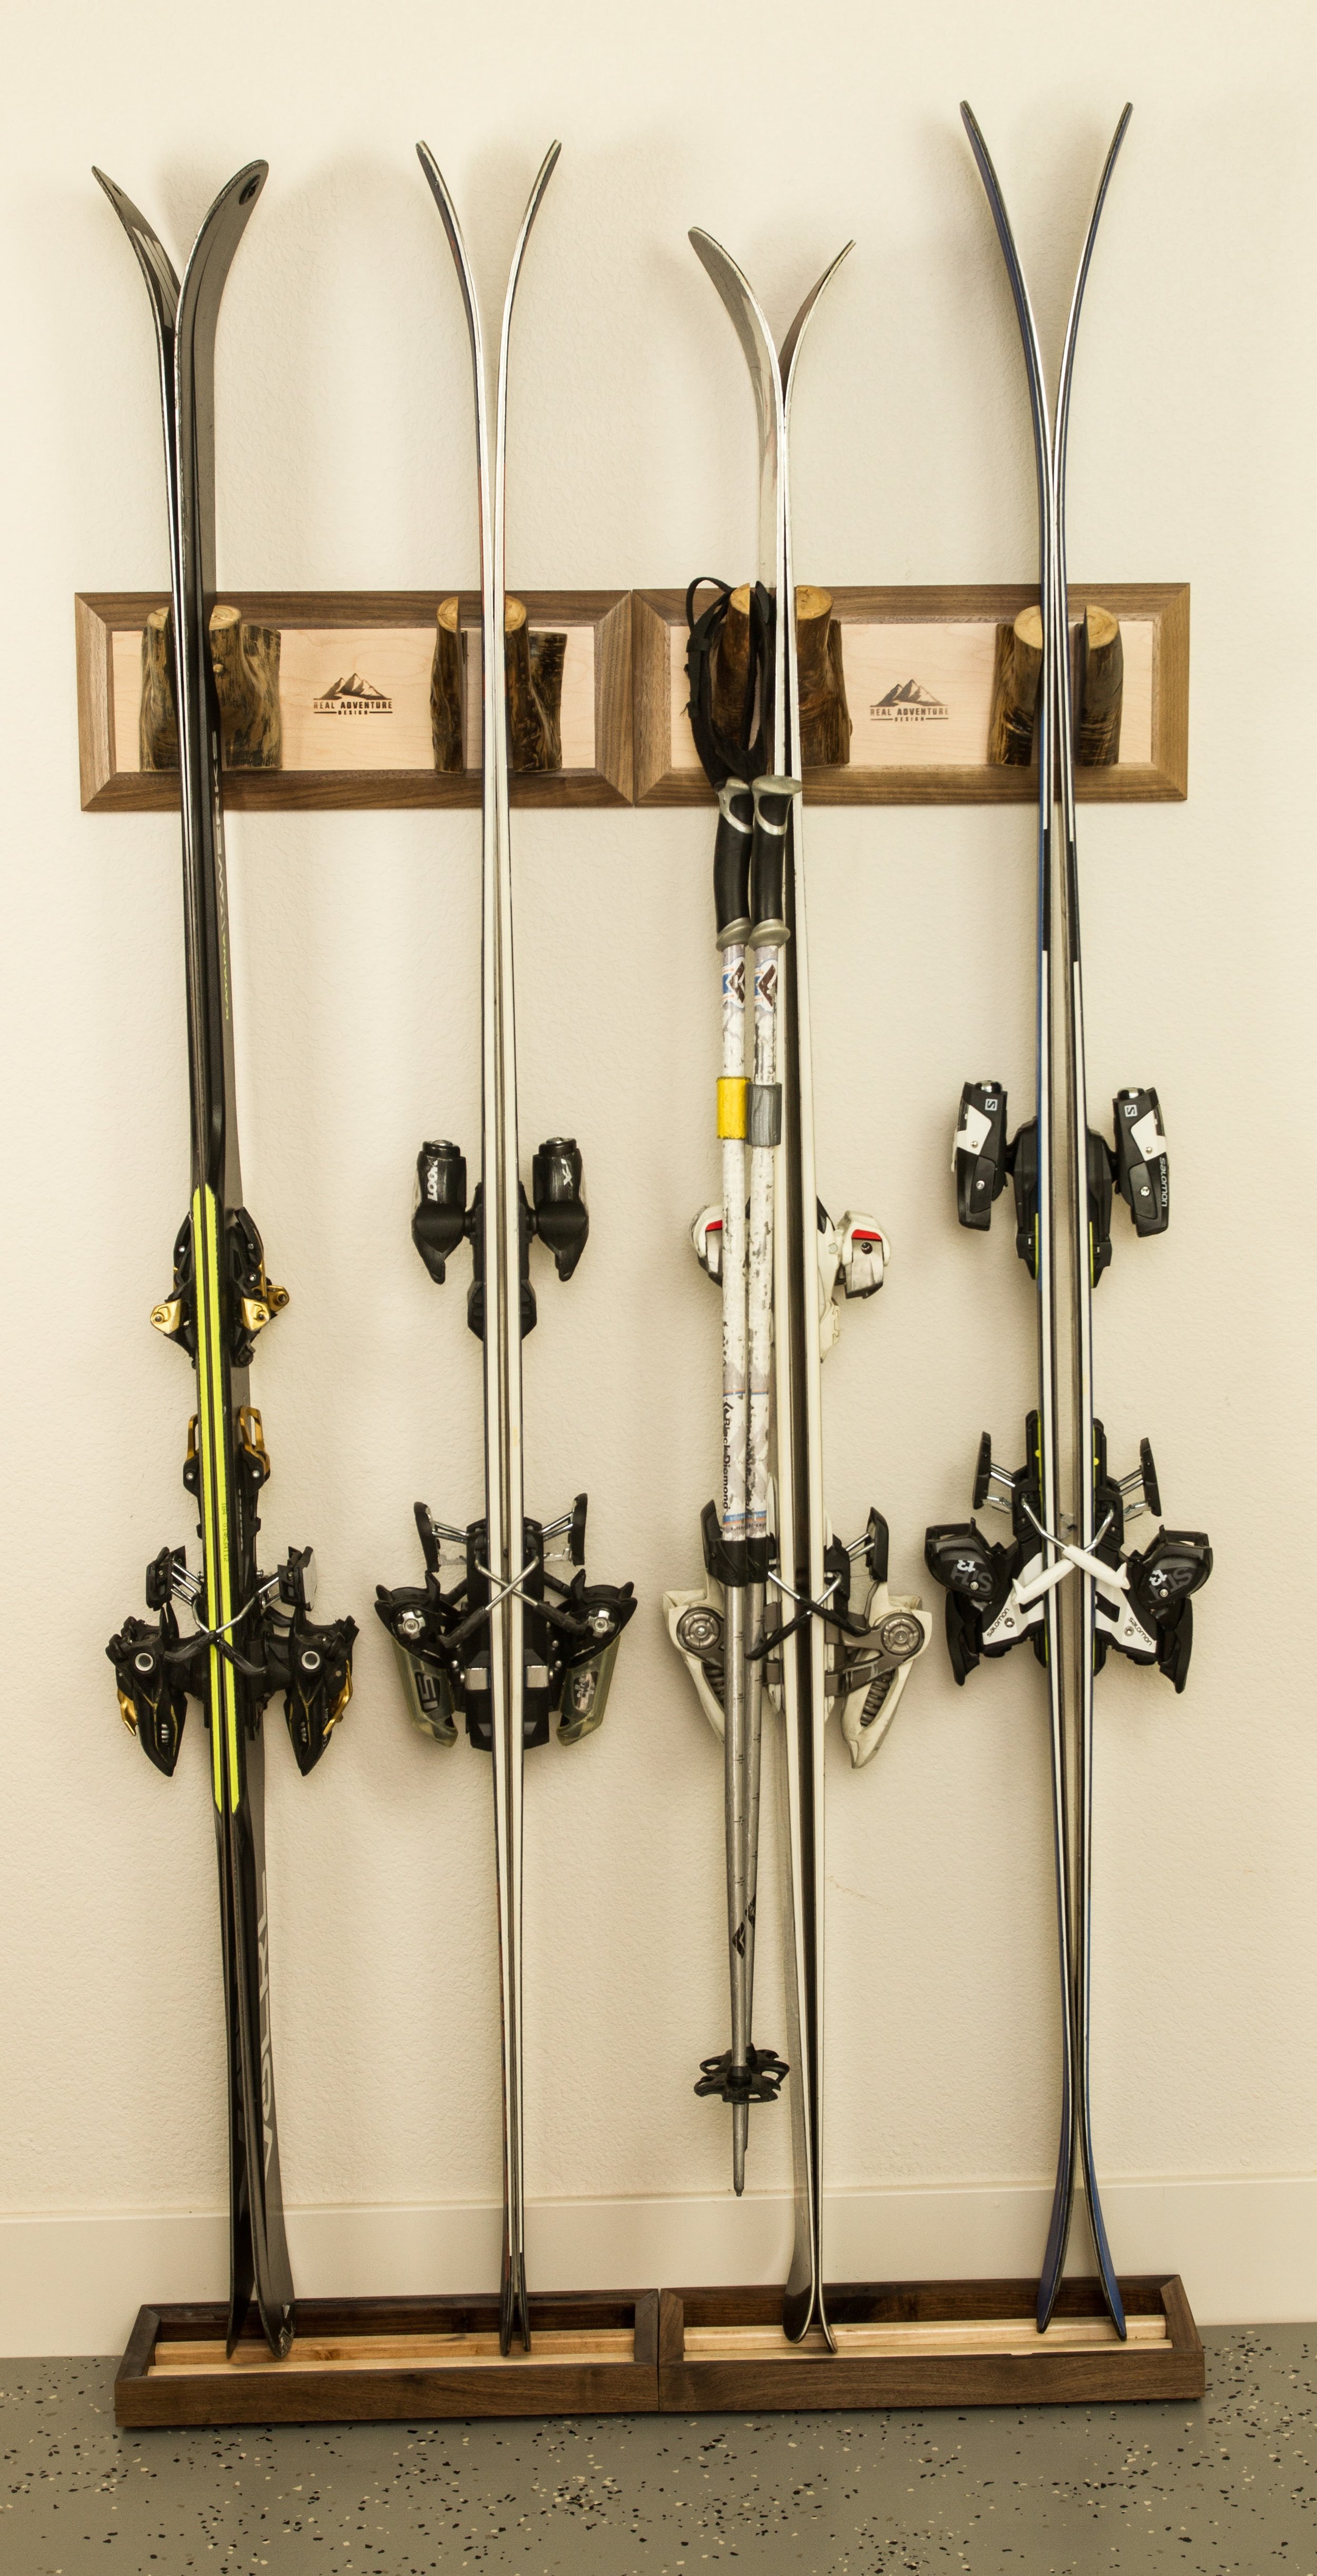  Once the kids are grown, the Meaden ski rack is modular - add them together for more ski capacity.&nbsp; 